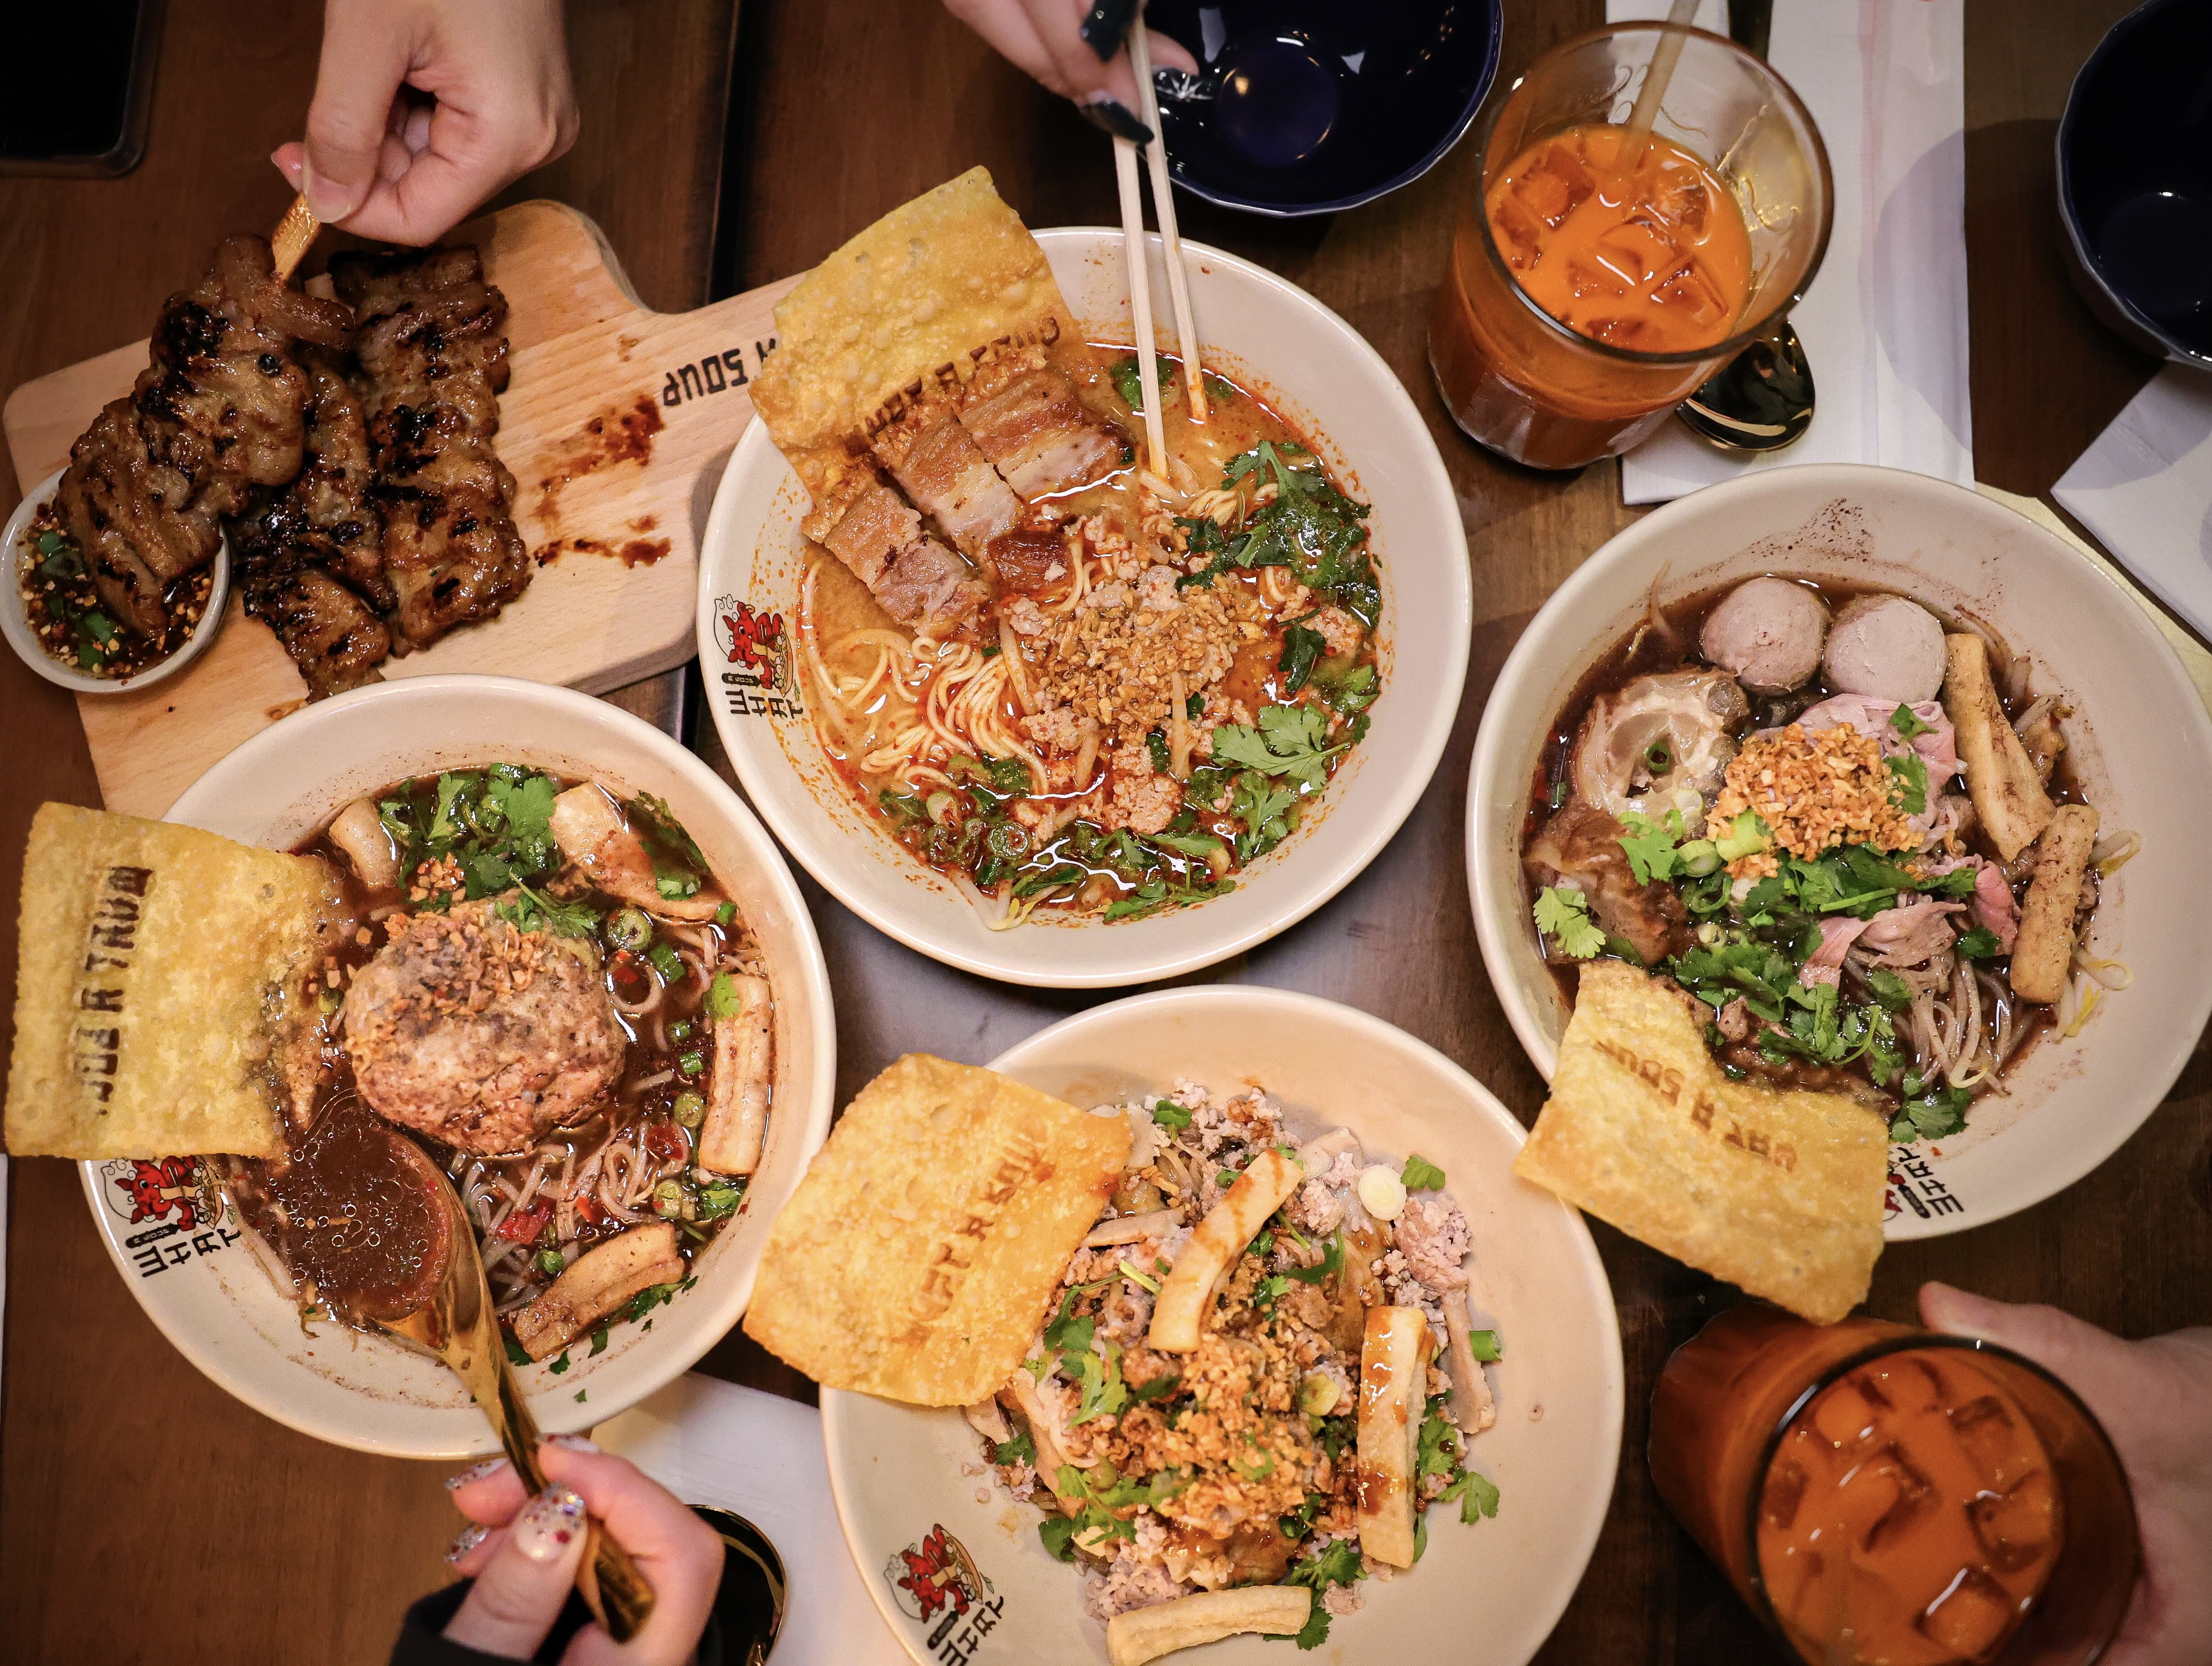 Four bowls of noodles and broth are laid out on a table with appetizers and drinks arranged around the edges.